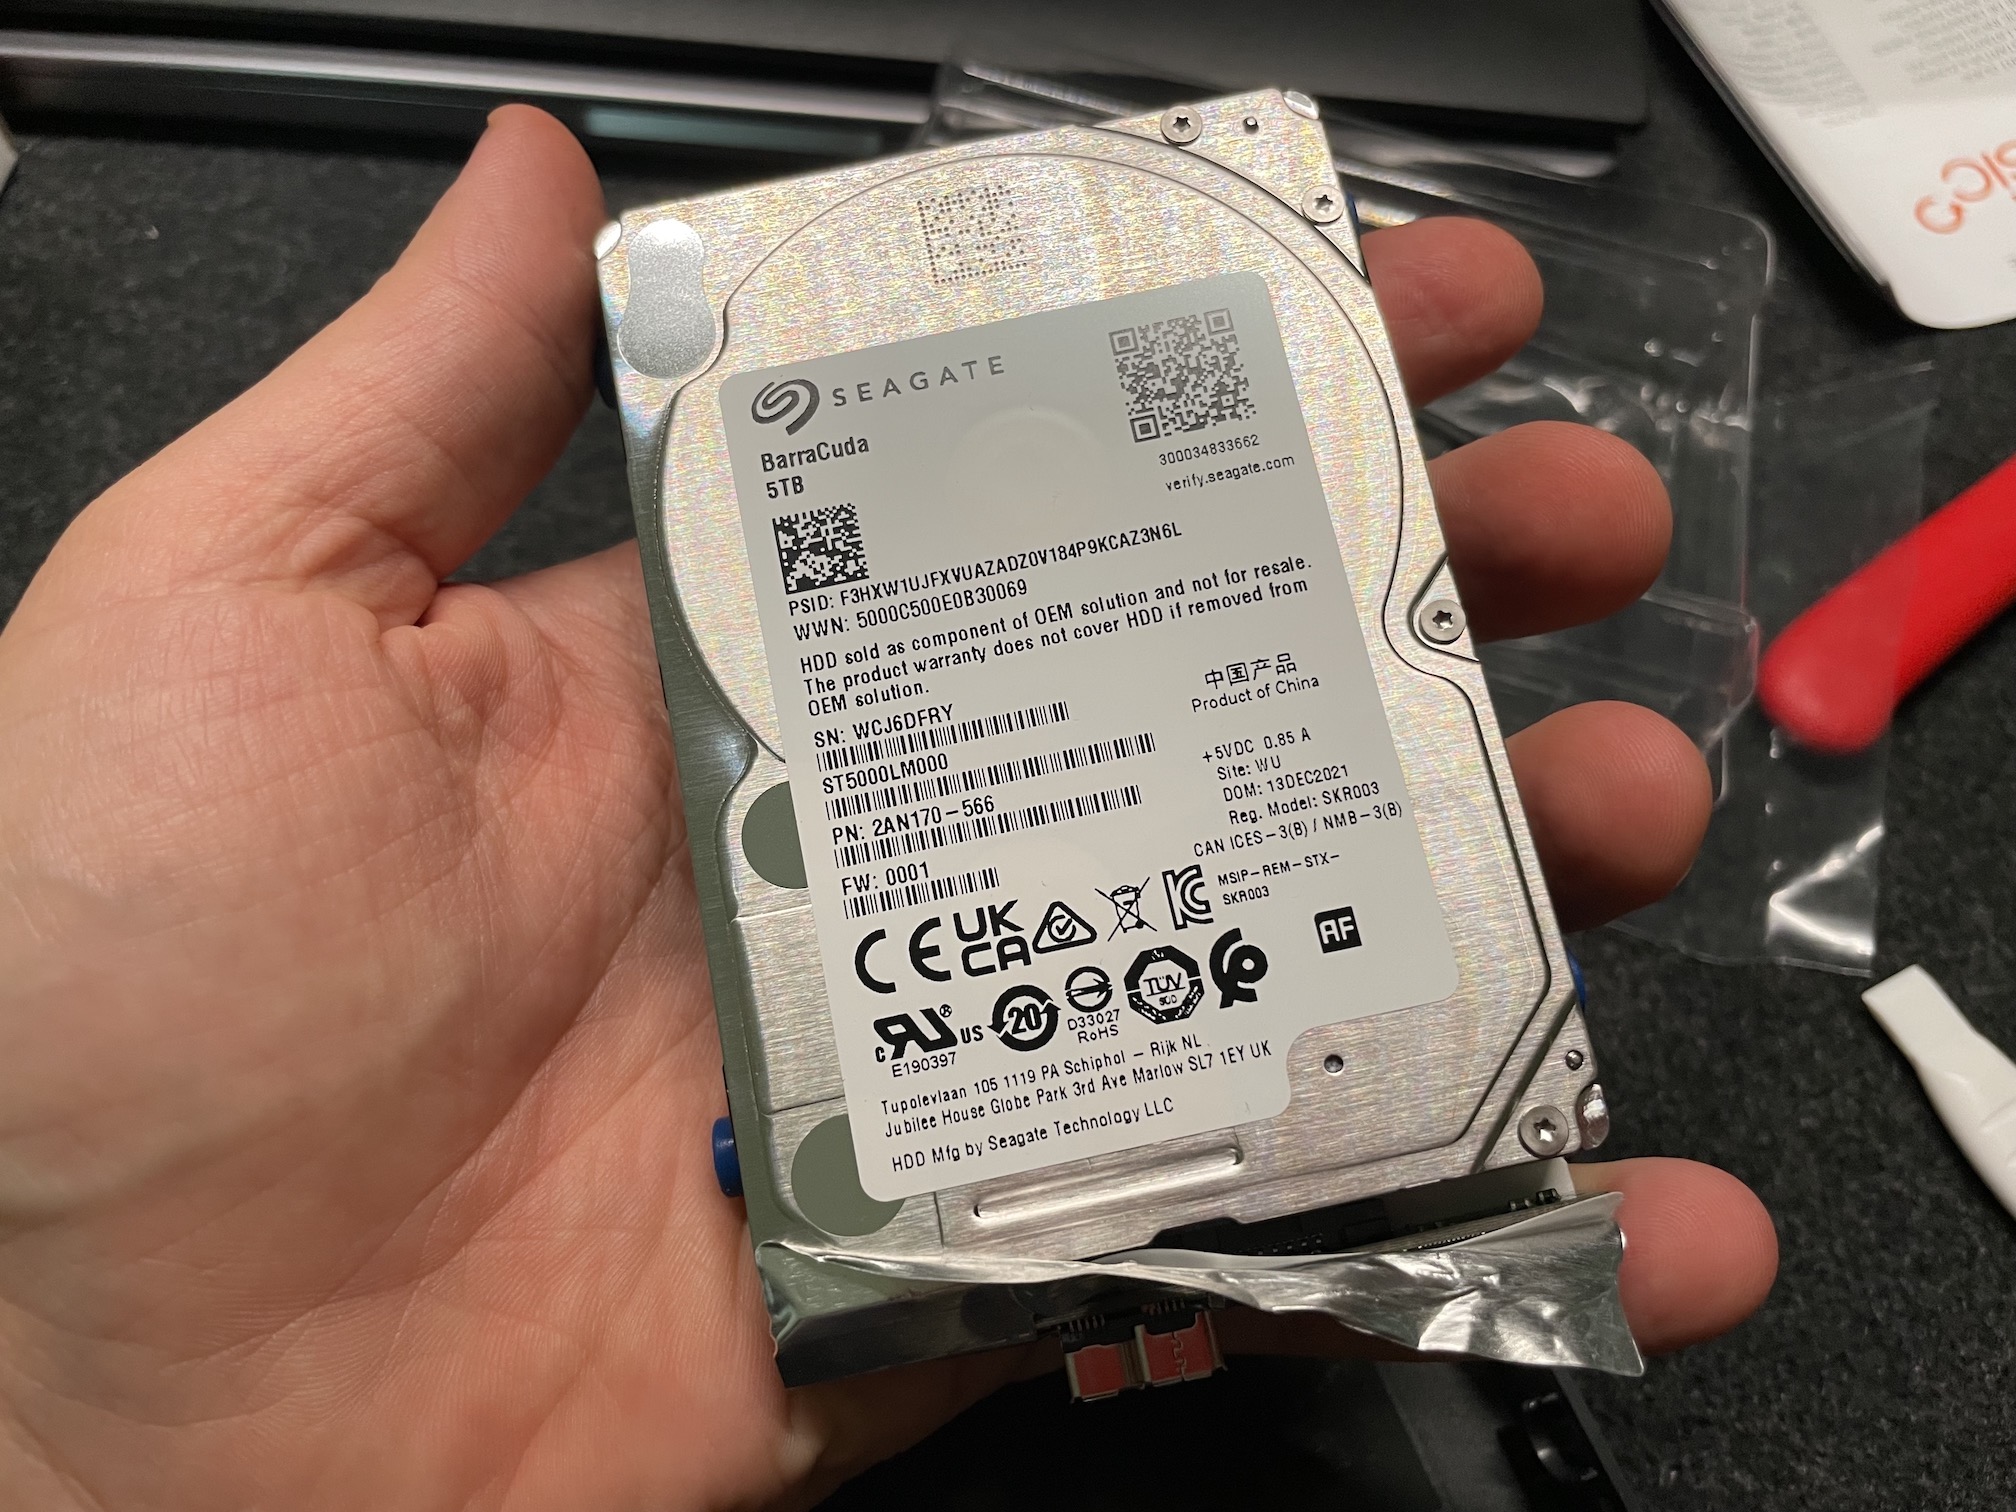 Hard drive model and part number